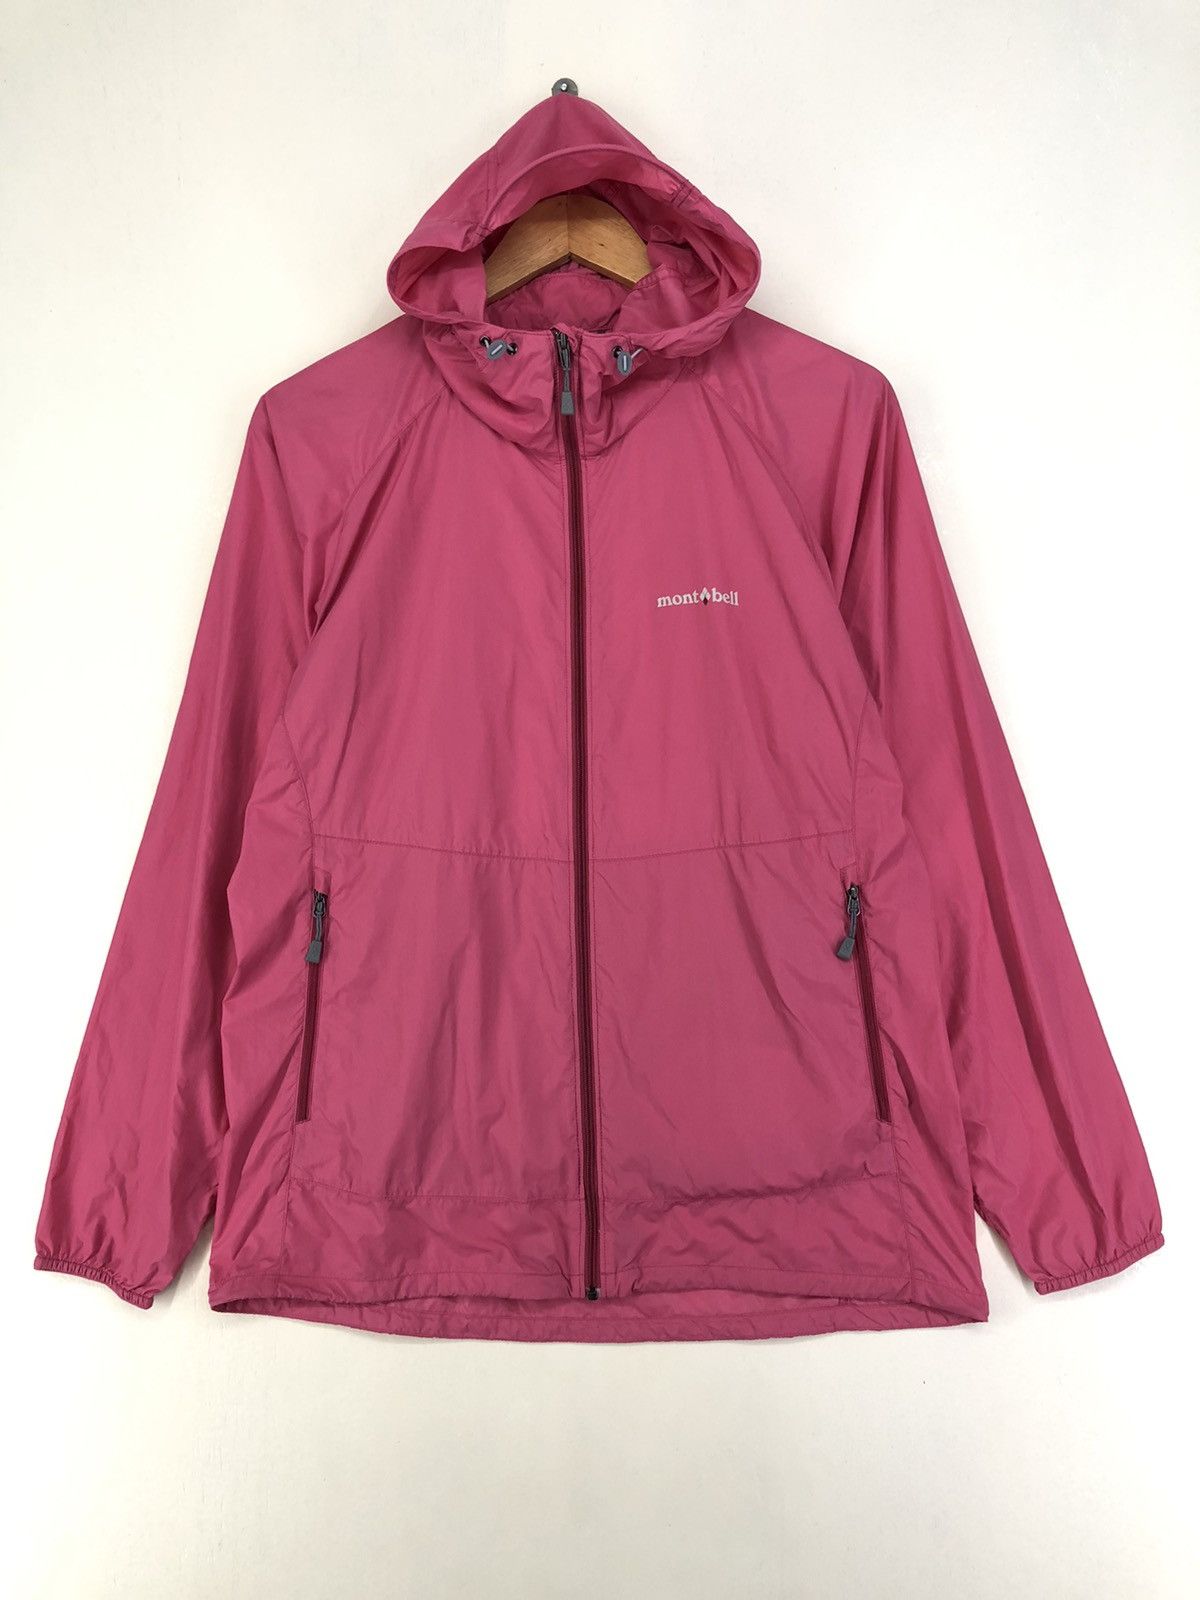 Archival Clothing Montbell Outdoor Pink Windbreaker Jacket | Grailed